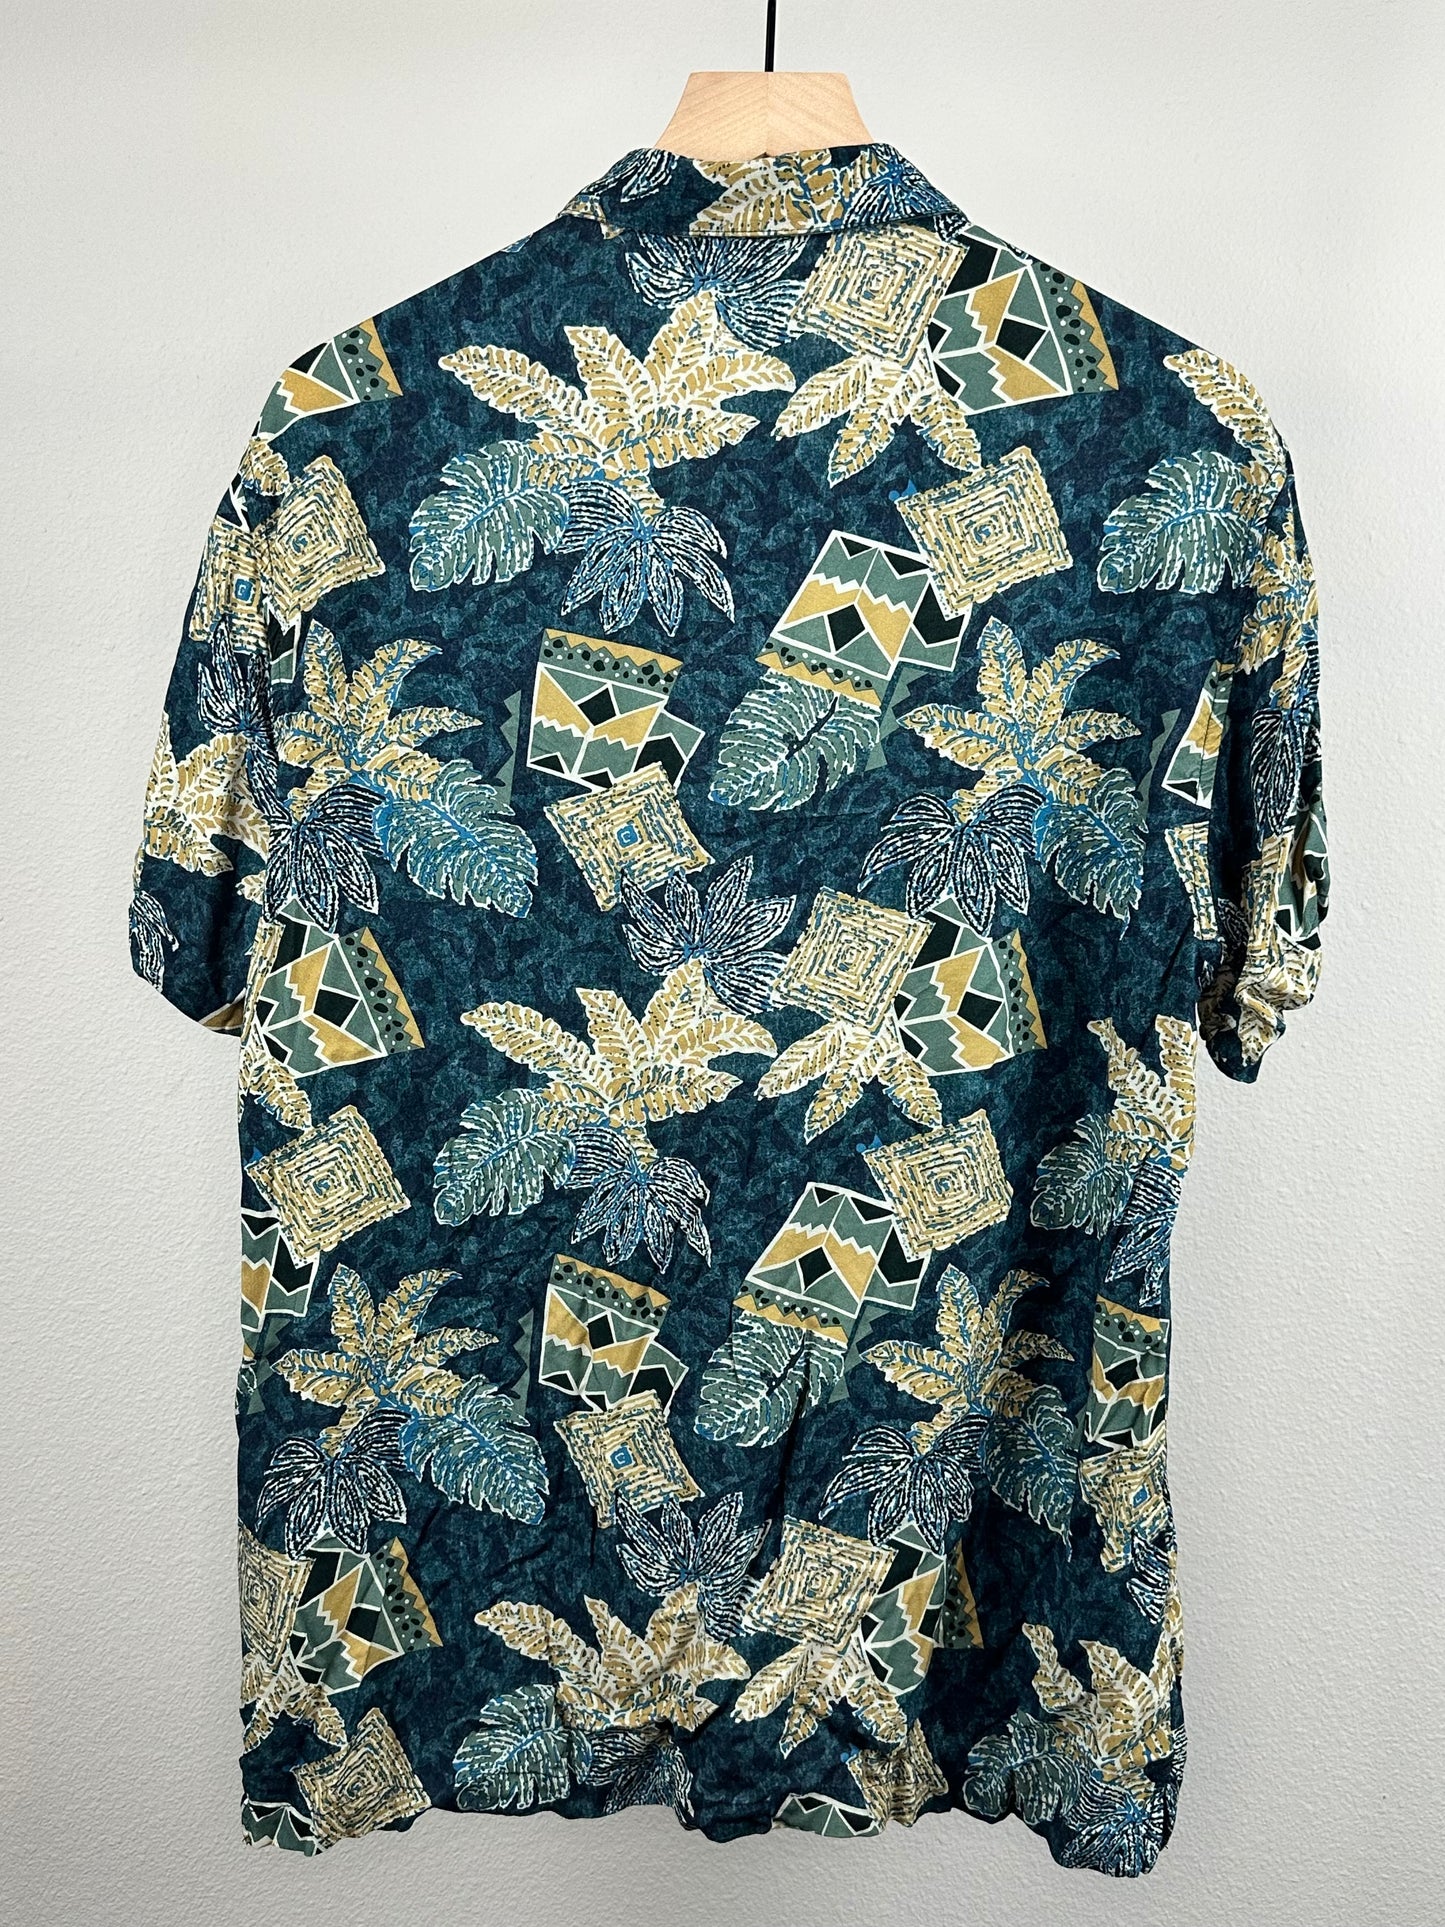 Mens Green and Blue Floral Button Up By Bershka